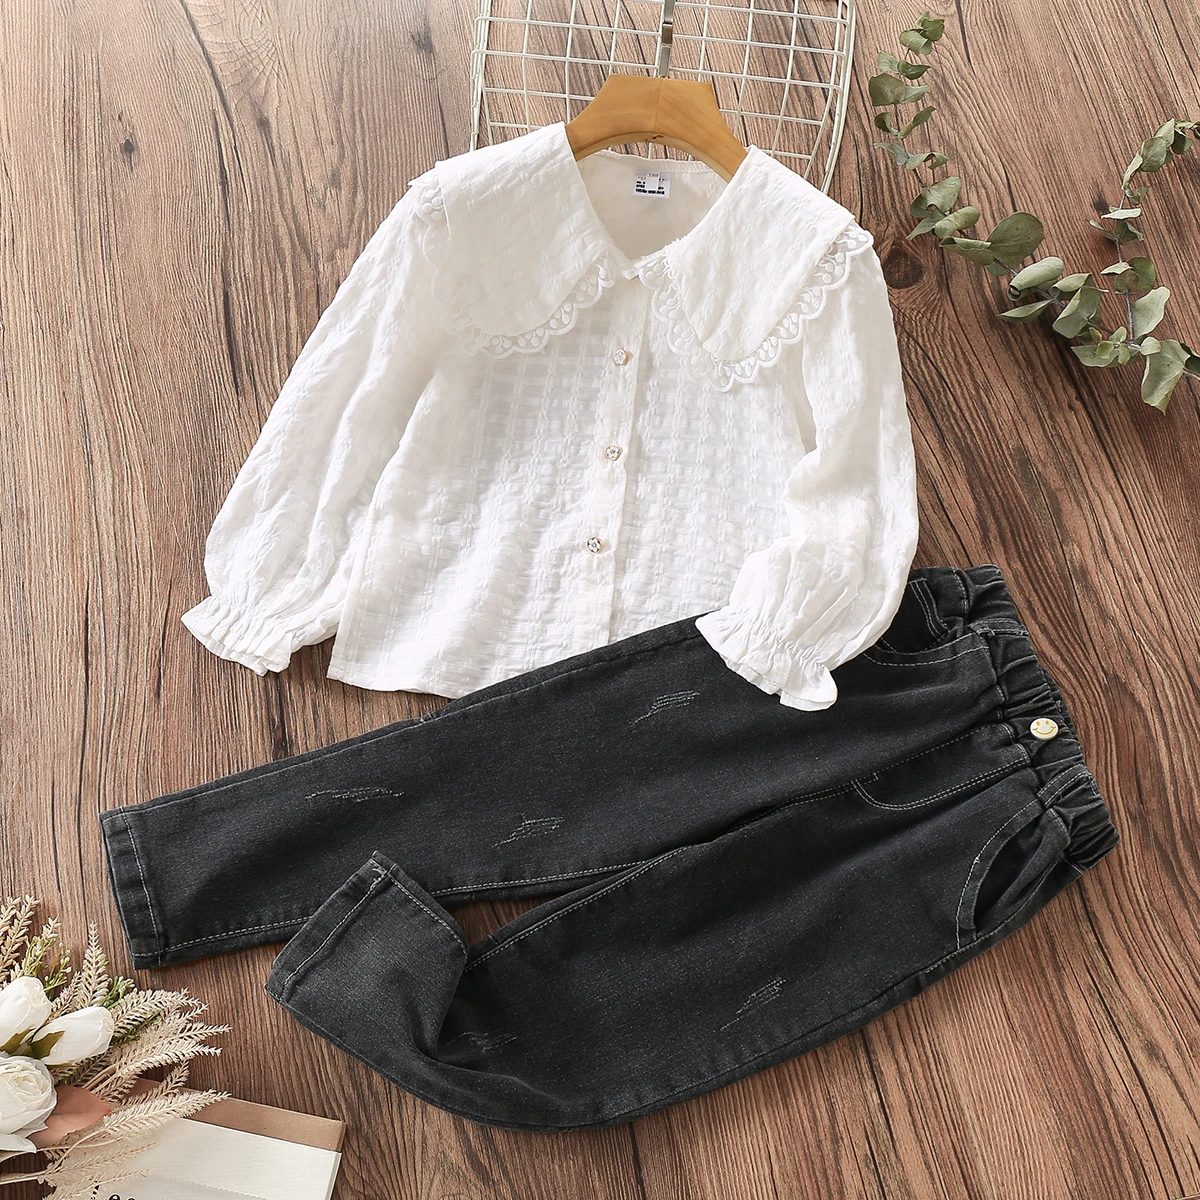 Baby Girls Blouses Kids Clothes for Girls White Shirts Spring Long Sleeve Cotton School Uniform Toddler Child Tops 2 4 6 8 Years